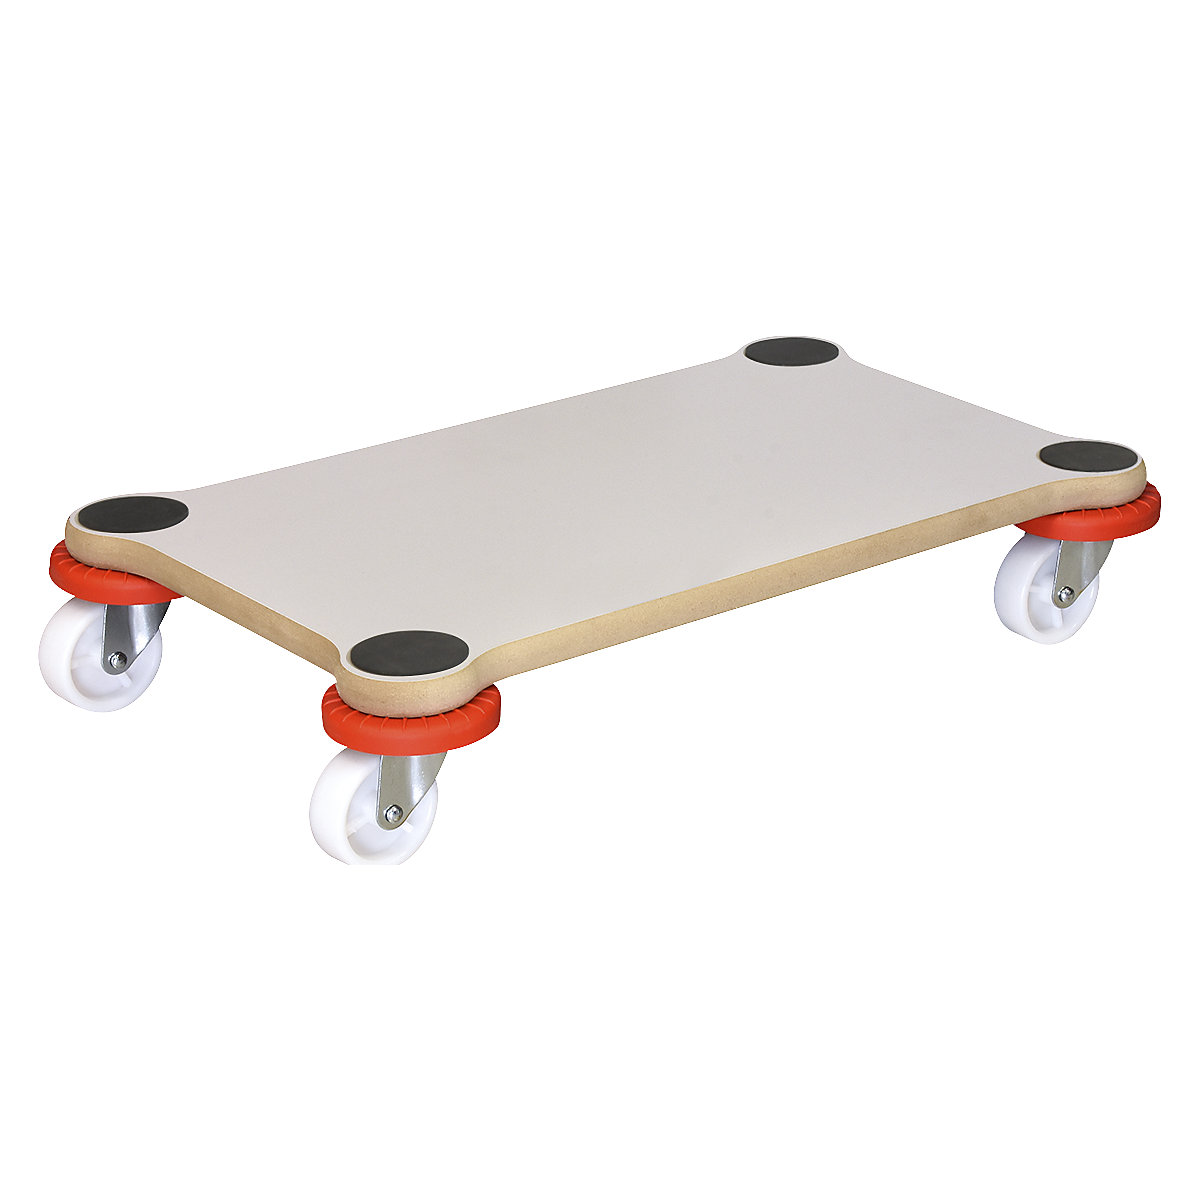 PROTECTION MM 1363 transport dolly – Wagner, LxW 520 x 320 mm, pack of 2, max. load 200 kg, 2+ packs-4